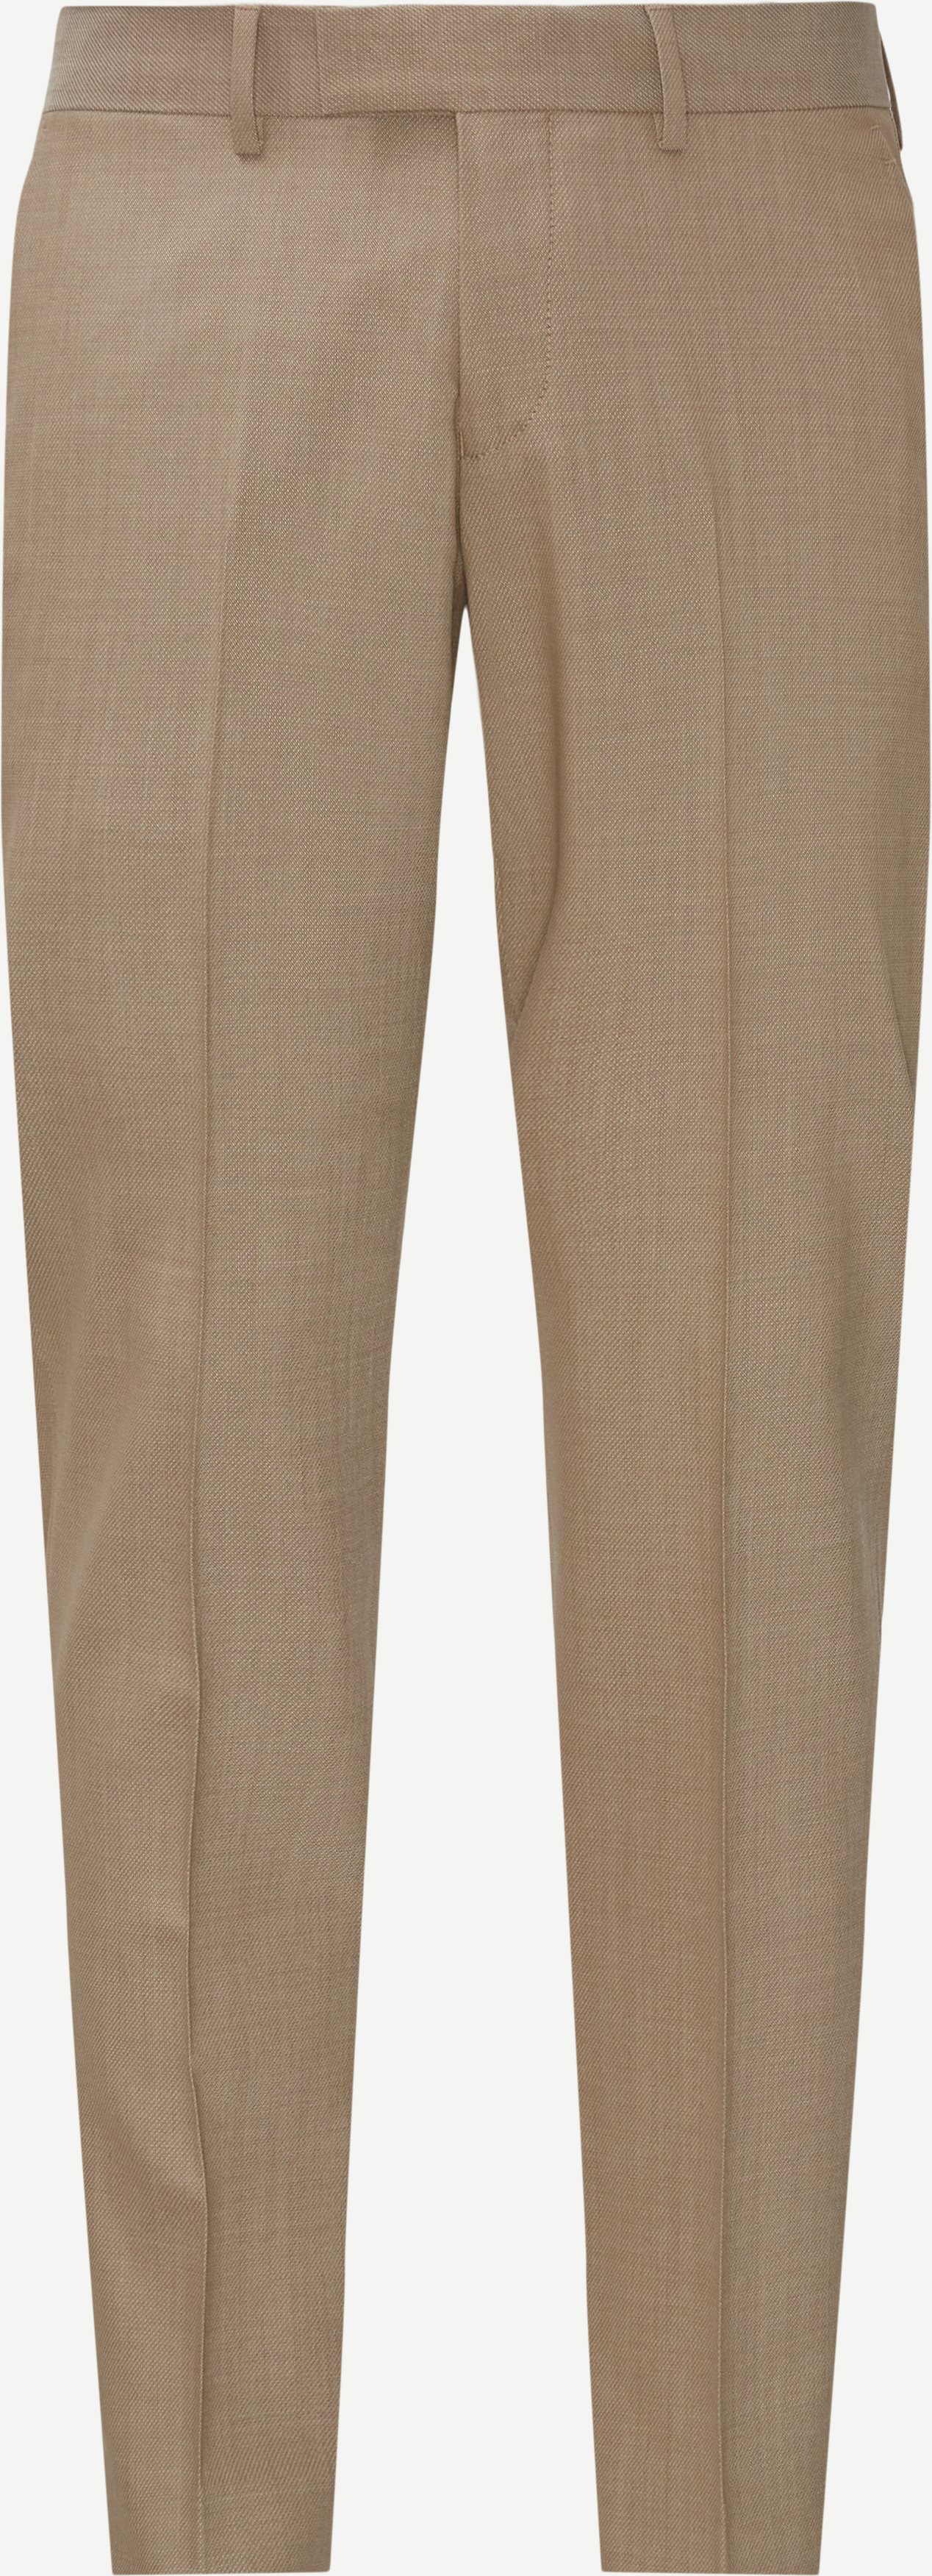 Trousers - Slim fit - Sand